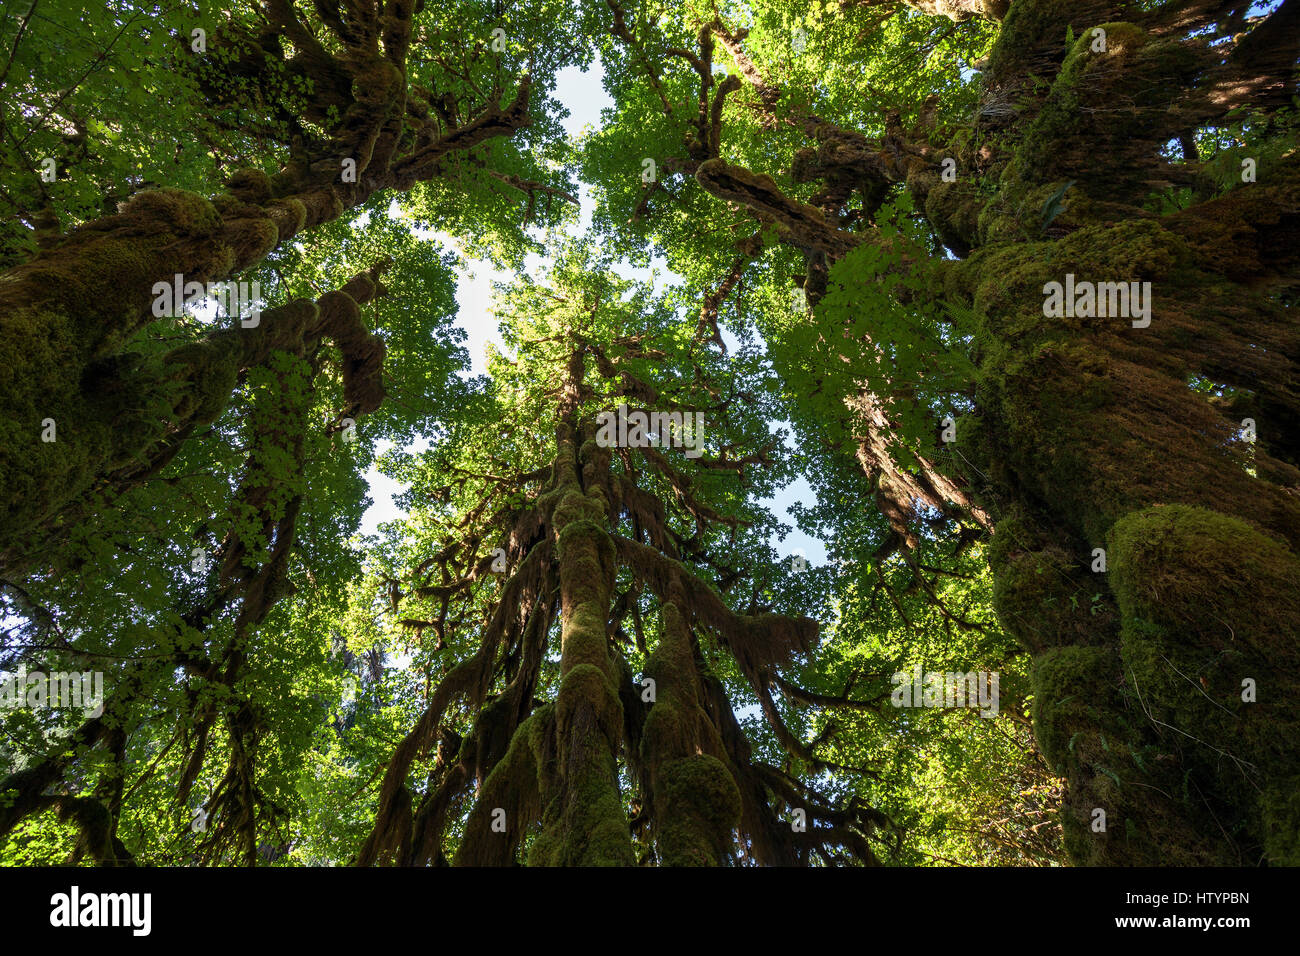 With moss-draped trees in the Hoh Rainforest, near Forks, Olympic National Park, Washington, USA Stock Photo